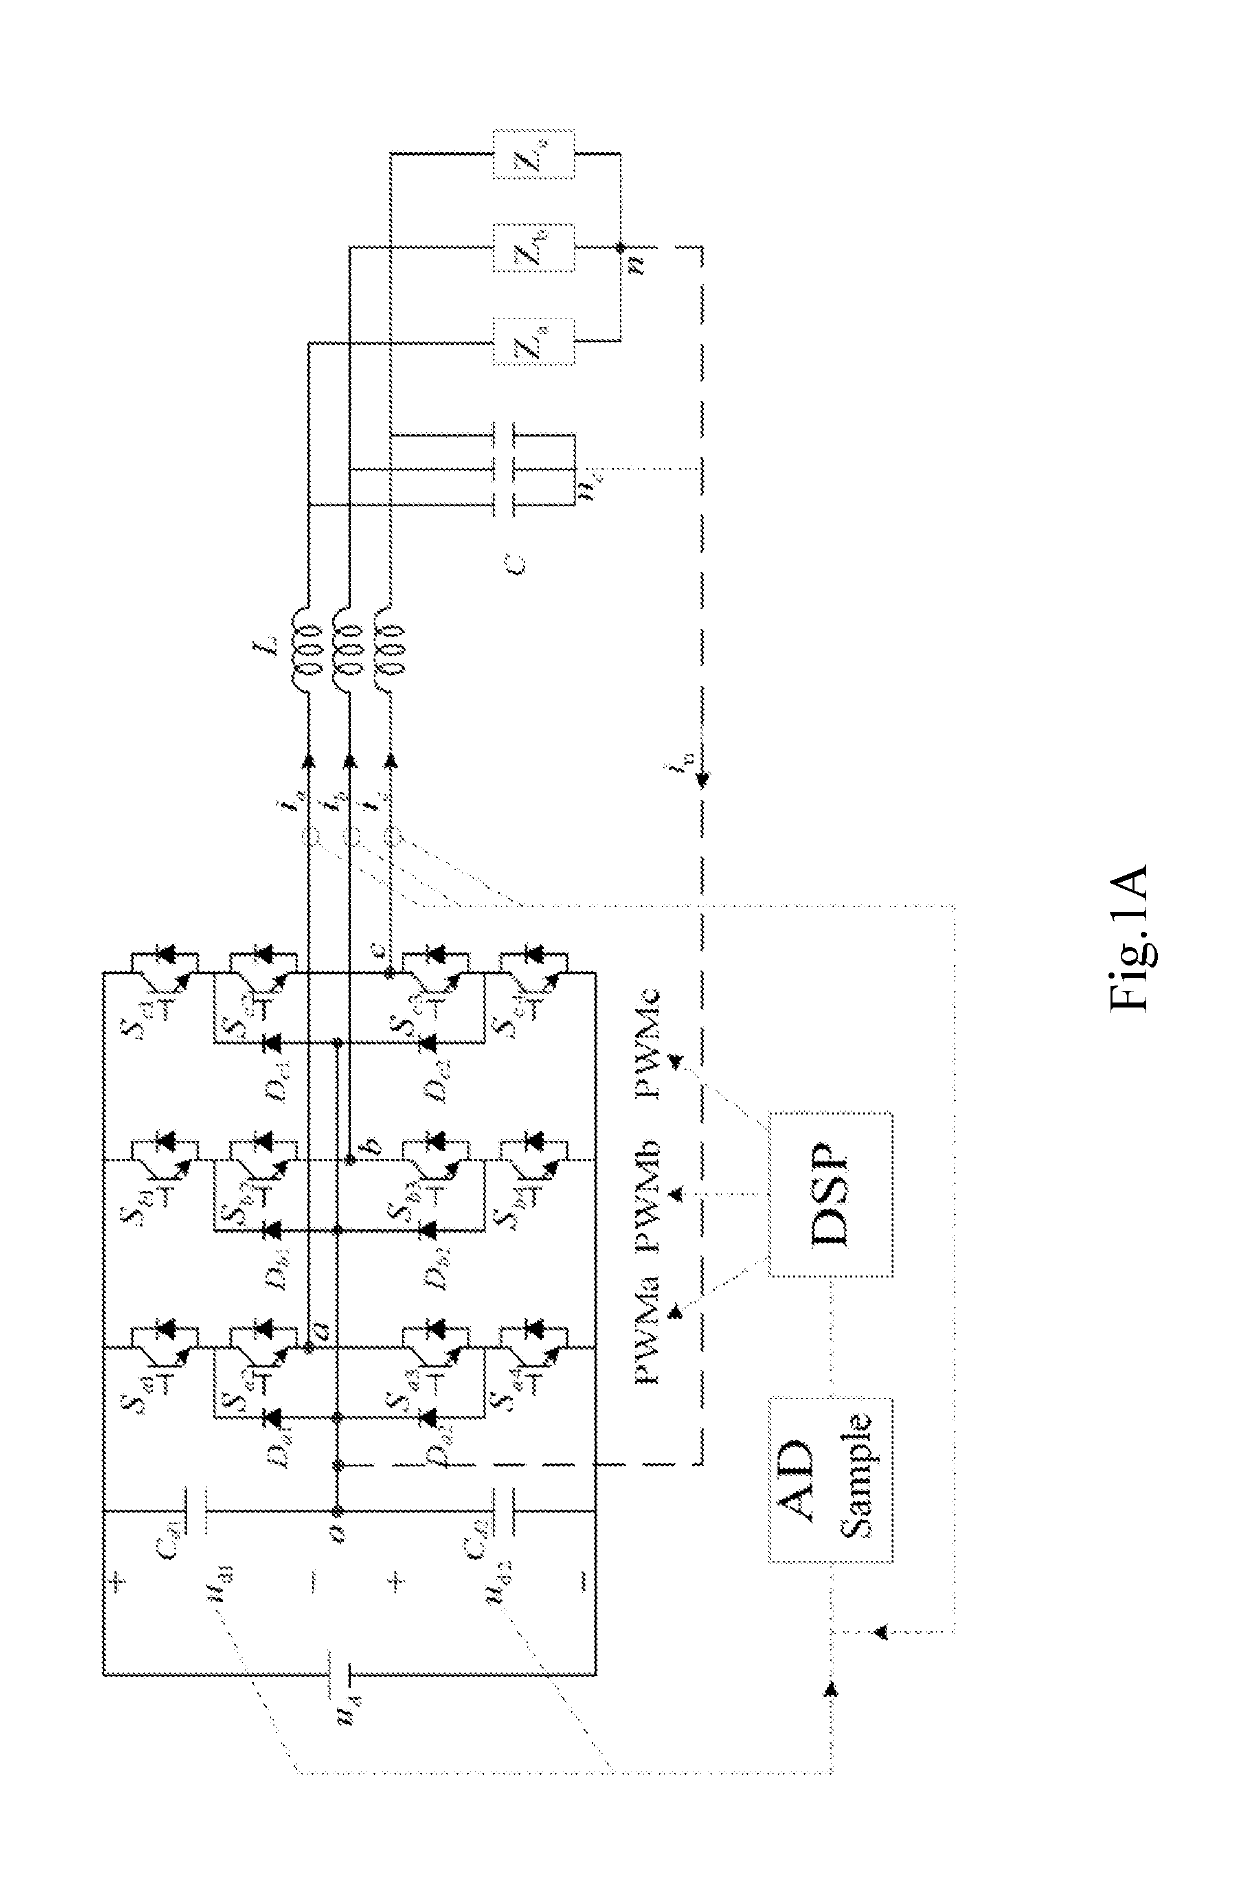 Three-level circuit and control method for balancing neutral point voltage of the same